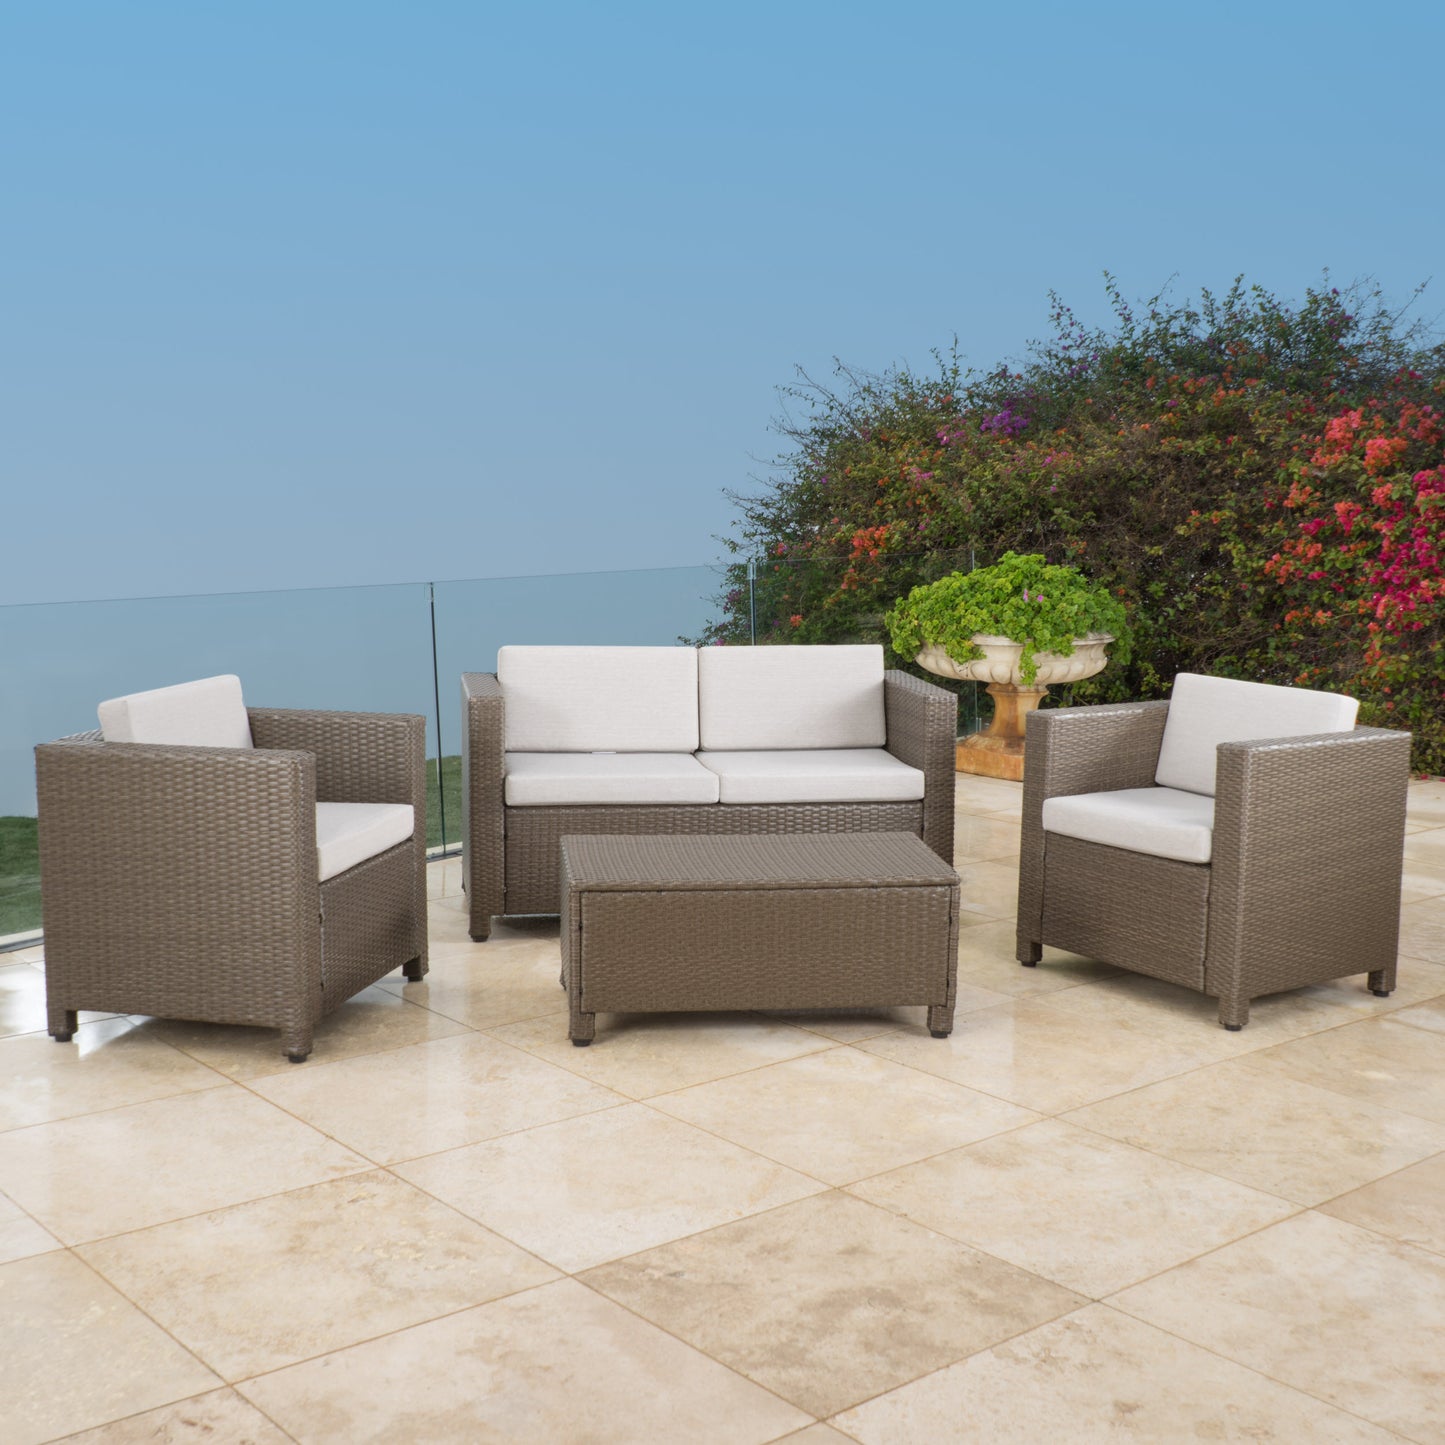 Pueblo 4 Piece Wicker Chat Set w/ Water Resistant Cushions & Cover